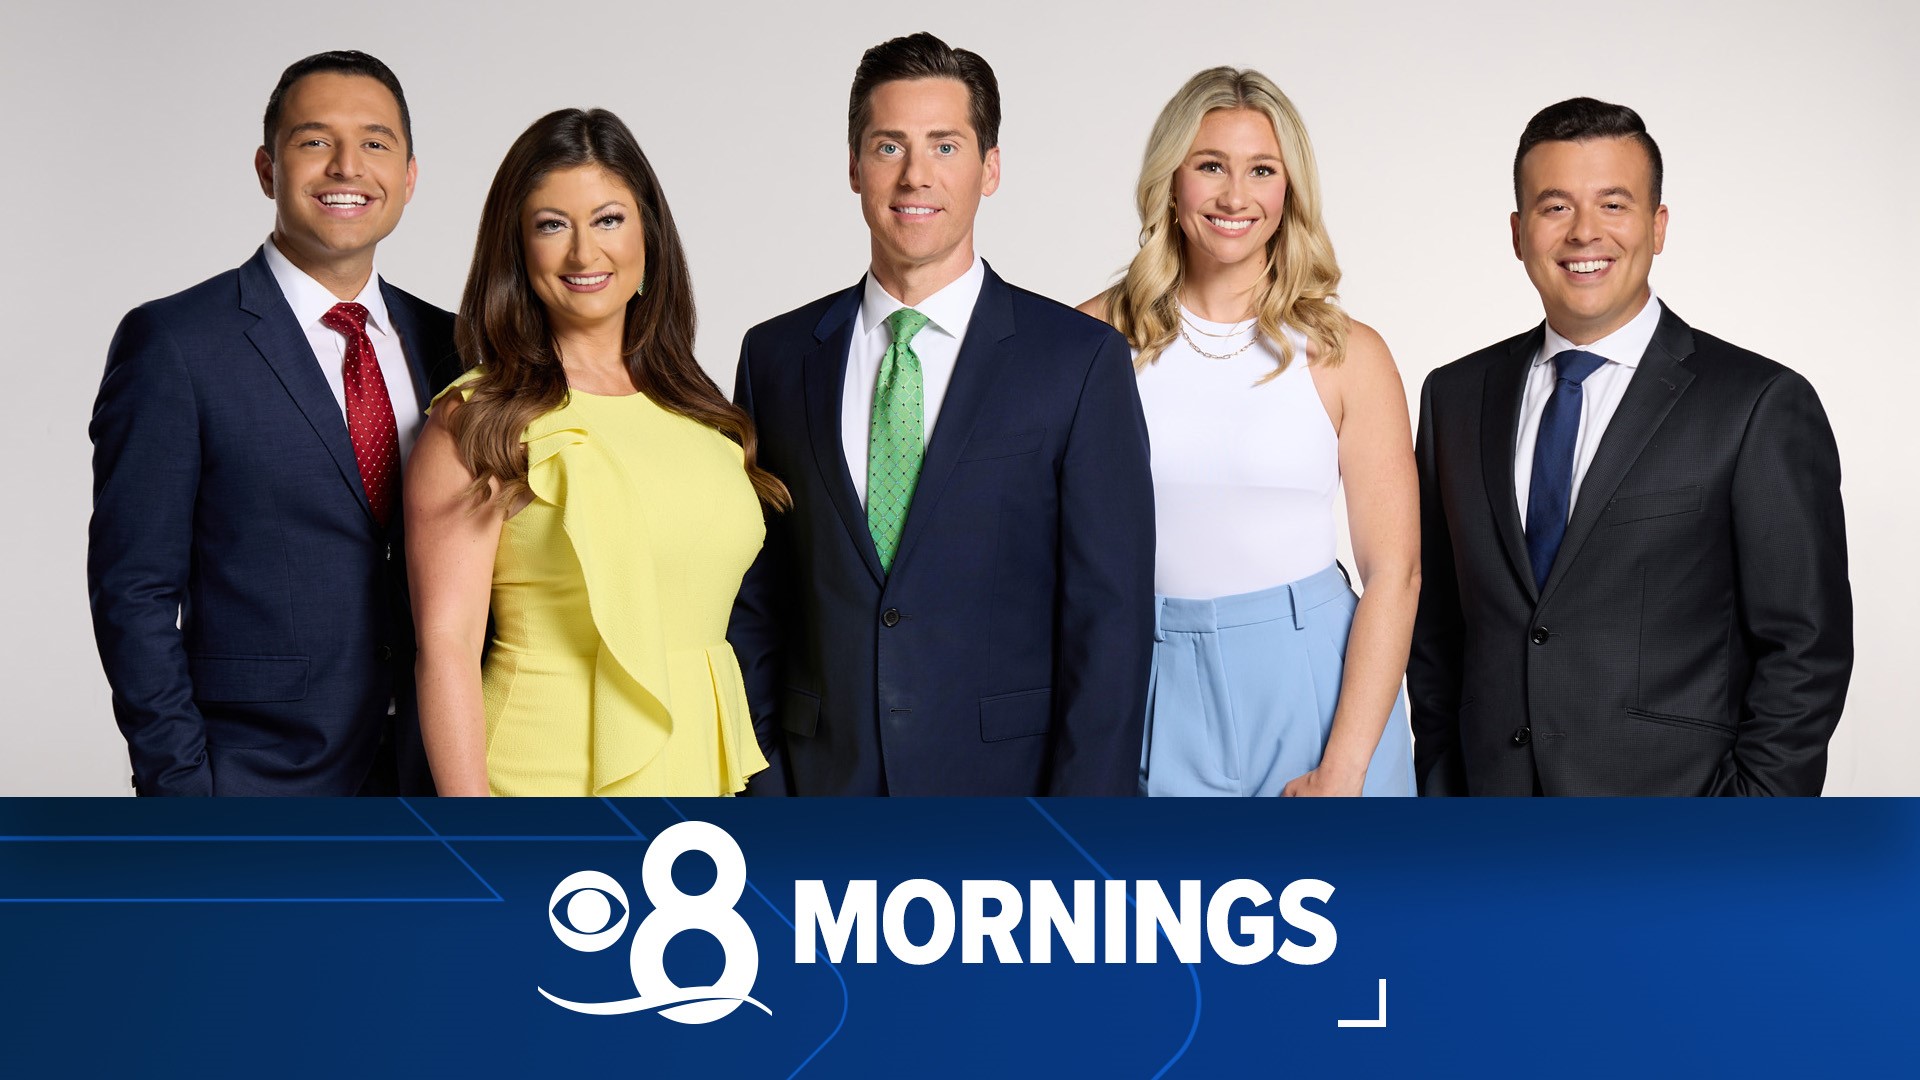 CBS 8 News gets you up to speed with what is happening today. Plus get up-to-the-minute weather and discover new ways to enjoy San Diego.
